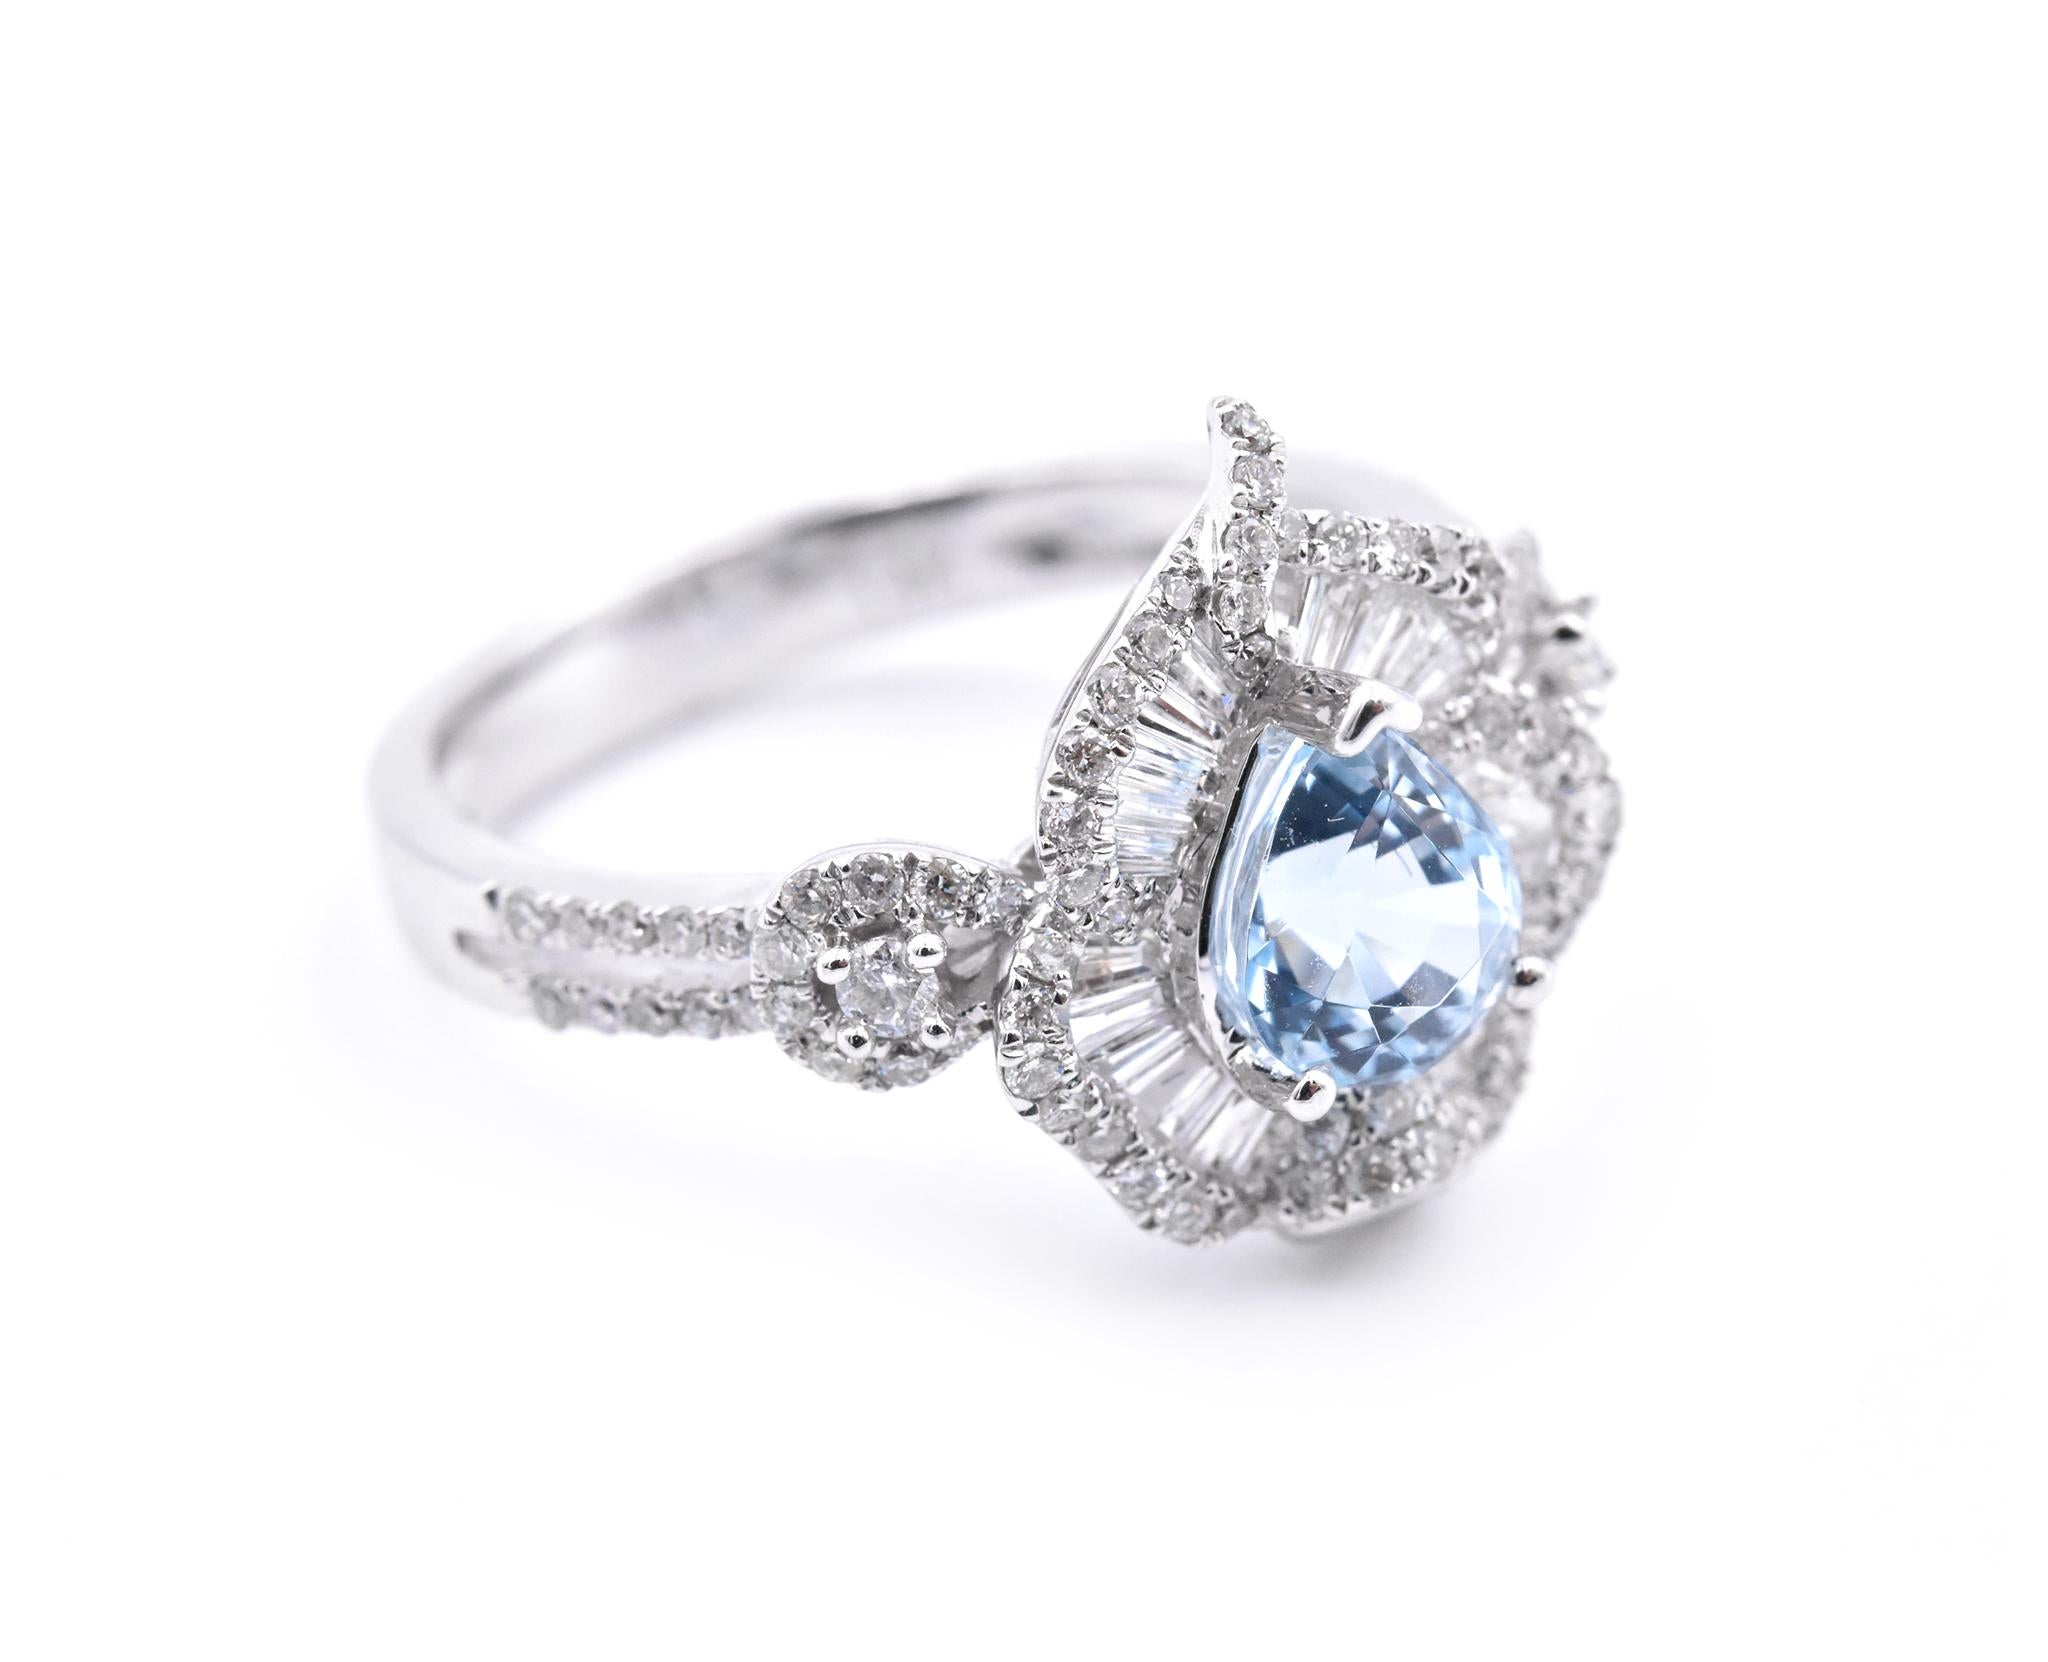 Designer: custom design
Material: 14k white gold
Gemstones: Pear Cut Aquamarine = .84ct
Certification: AGI 25343
Diamonds: 108 round brilliant cuts = .72cttw
Color: F
Clarity: VS2-SI
Ring Size: 7.5 (please allow two additional shipping days for